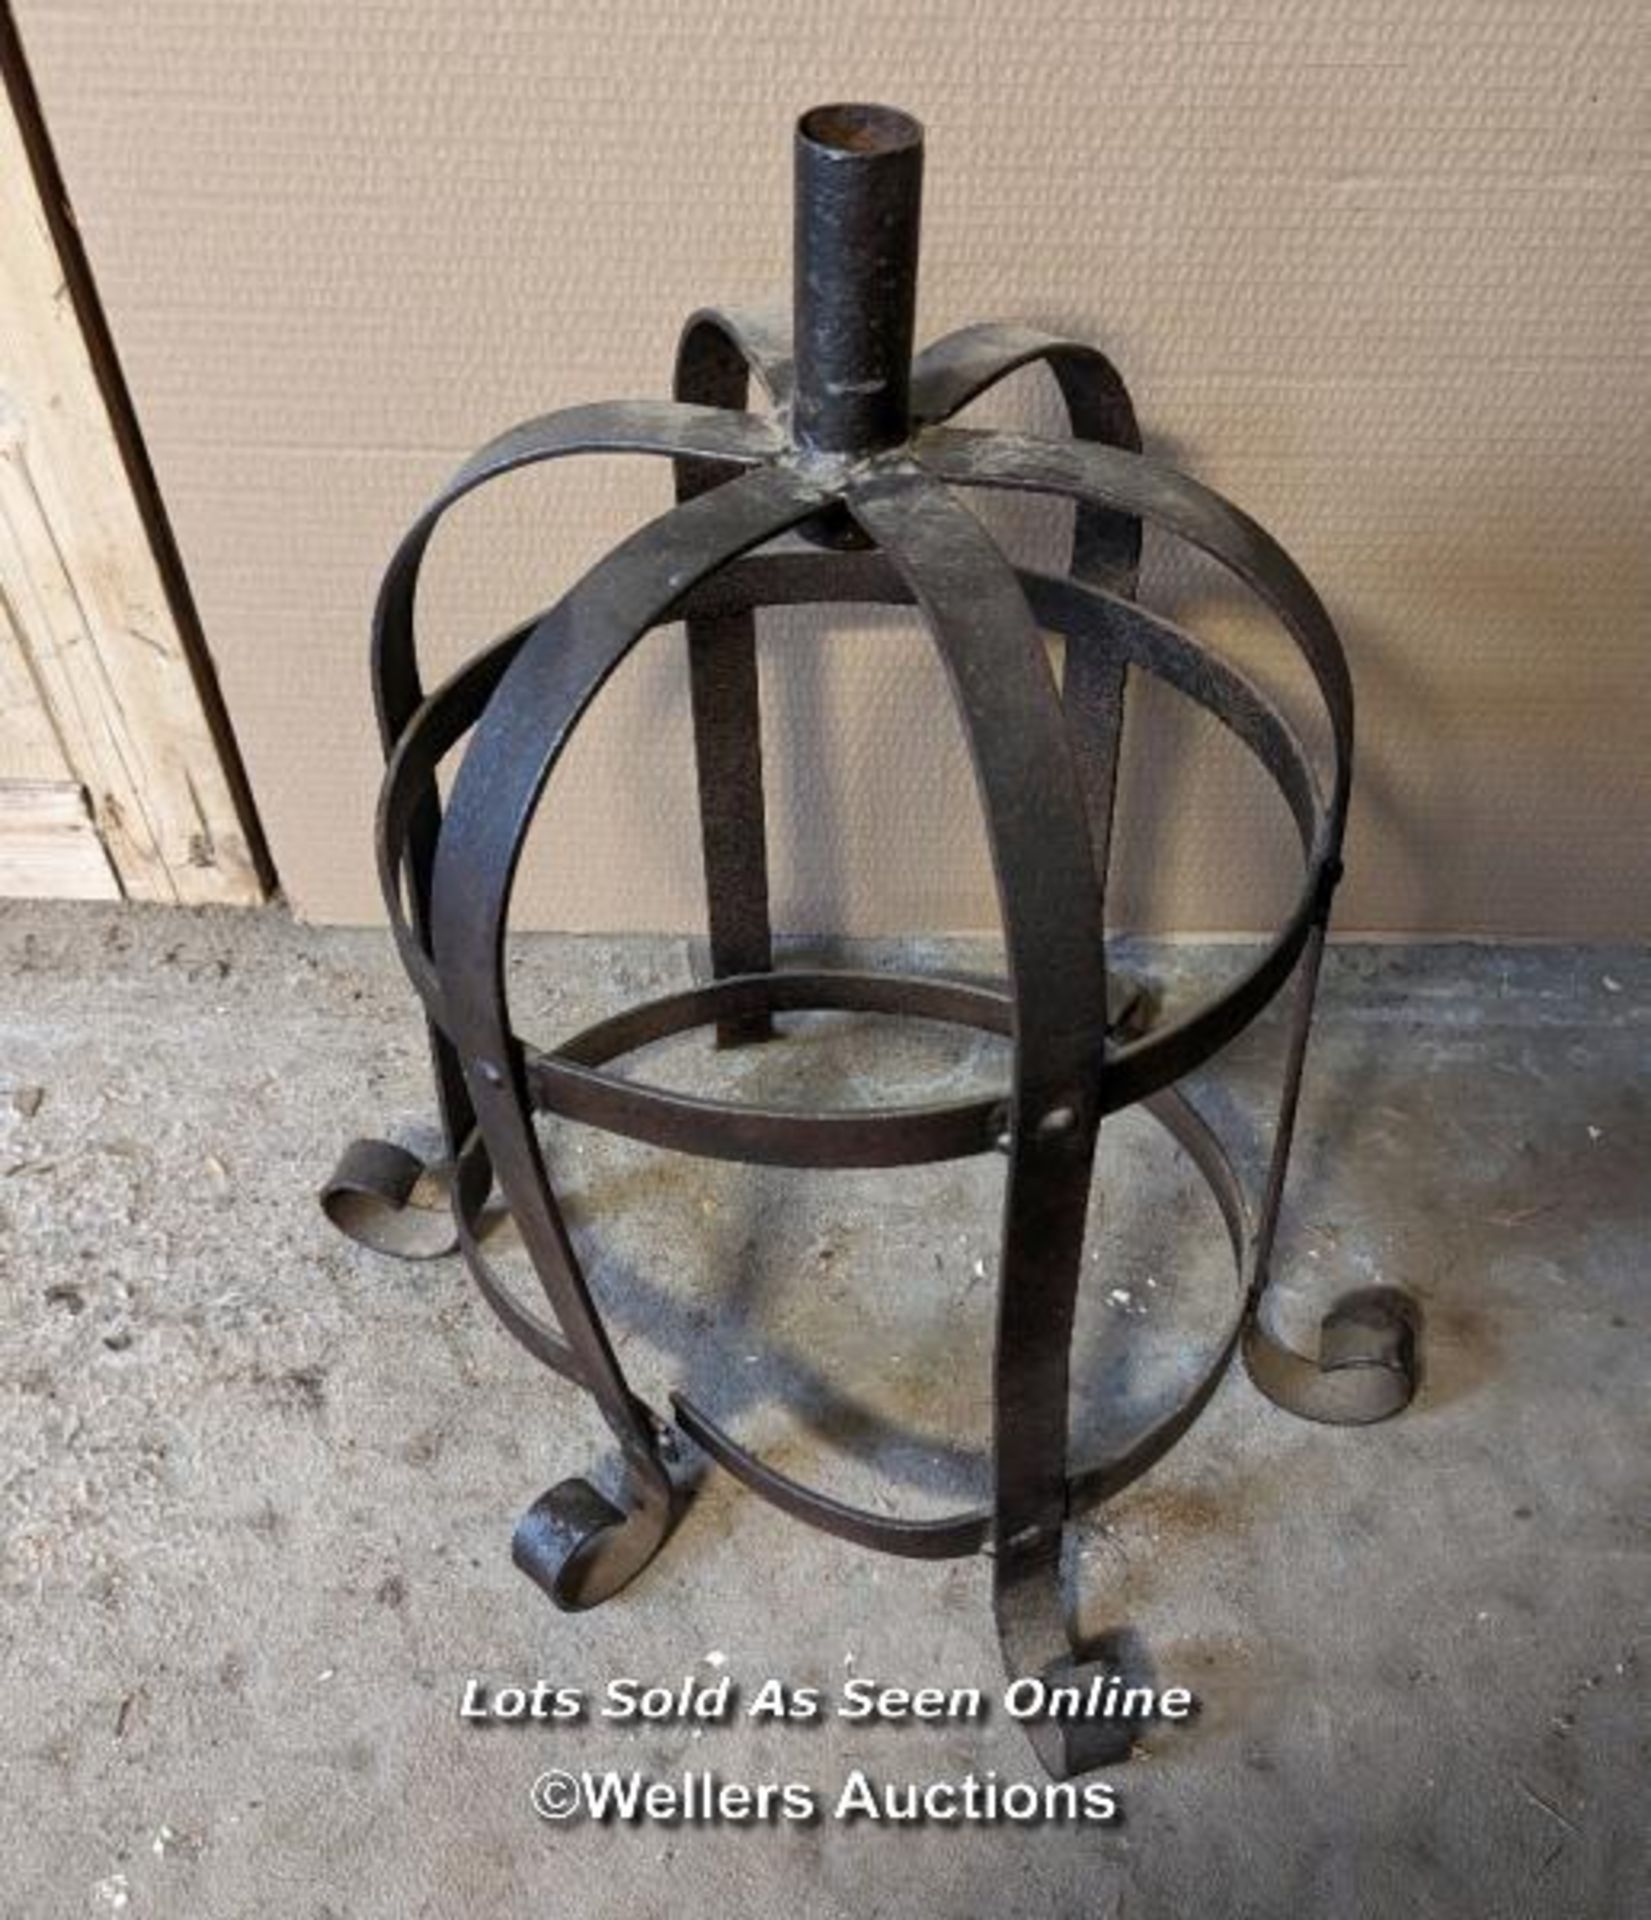 2 wrought iron Victorian braziers, one converted to a light plus a spare. Approx 46cm W x 46cm H. - Image 4 of 4